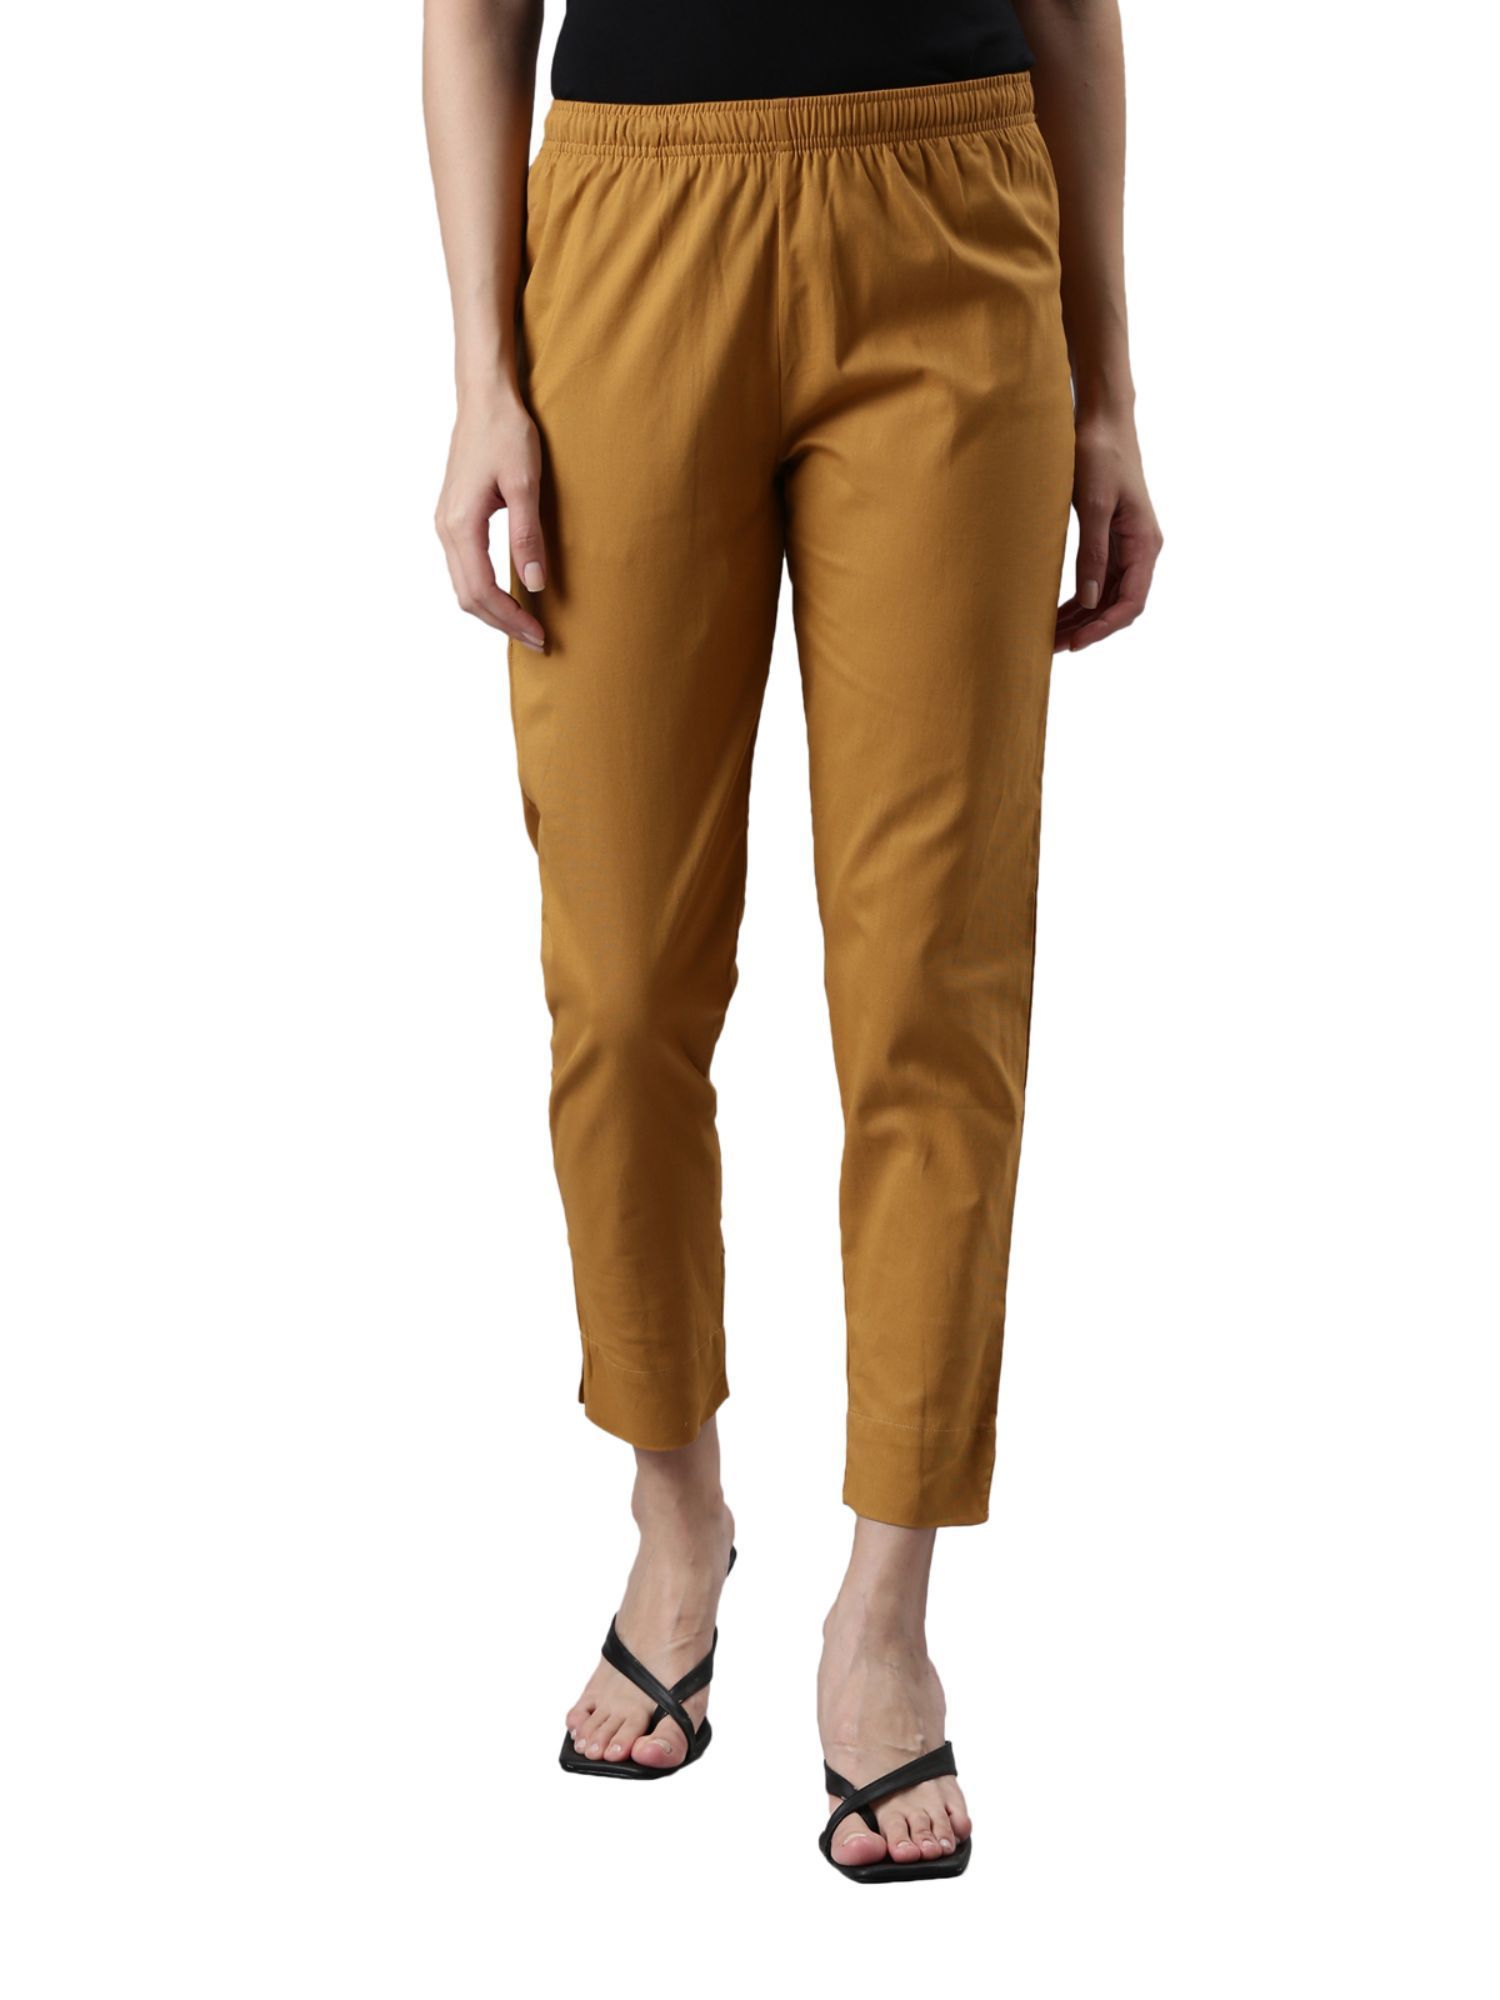 Go Colors Women Striped Linen Mid Rise Pencil Pants  Yellow Buy Go Colors  Women Striped Linen Mid Rise Pencil Pants  Yellow Online at Best Price in  India  Nykaa